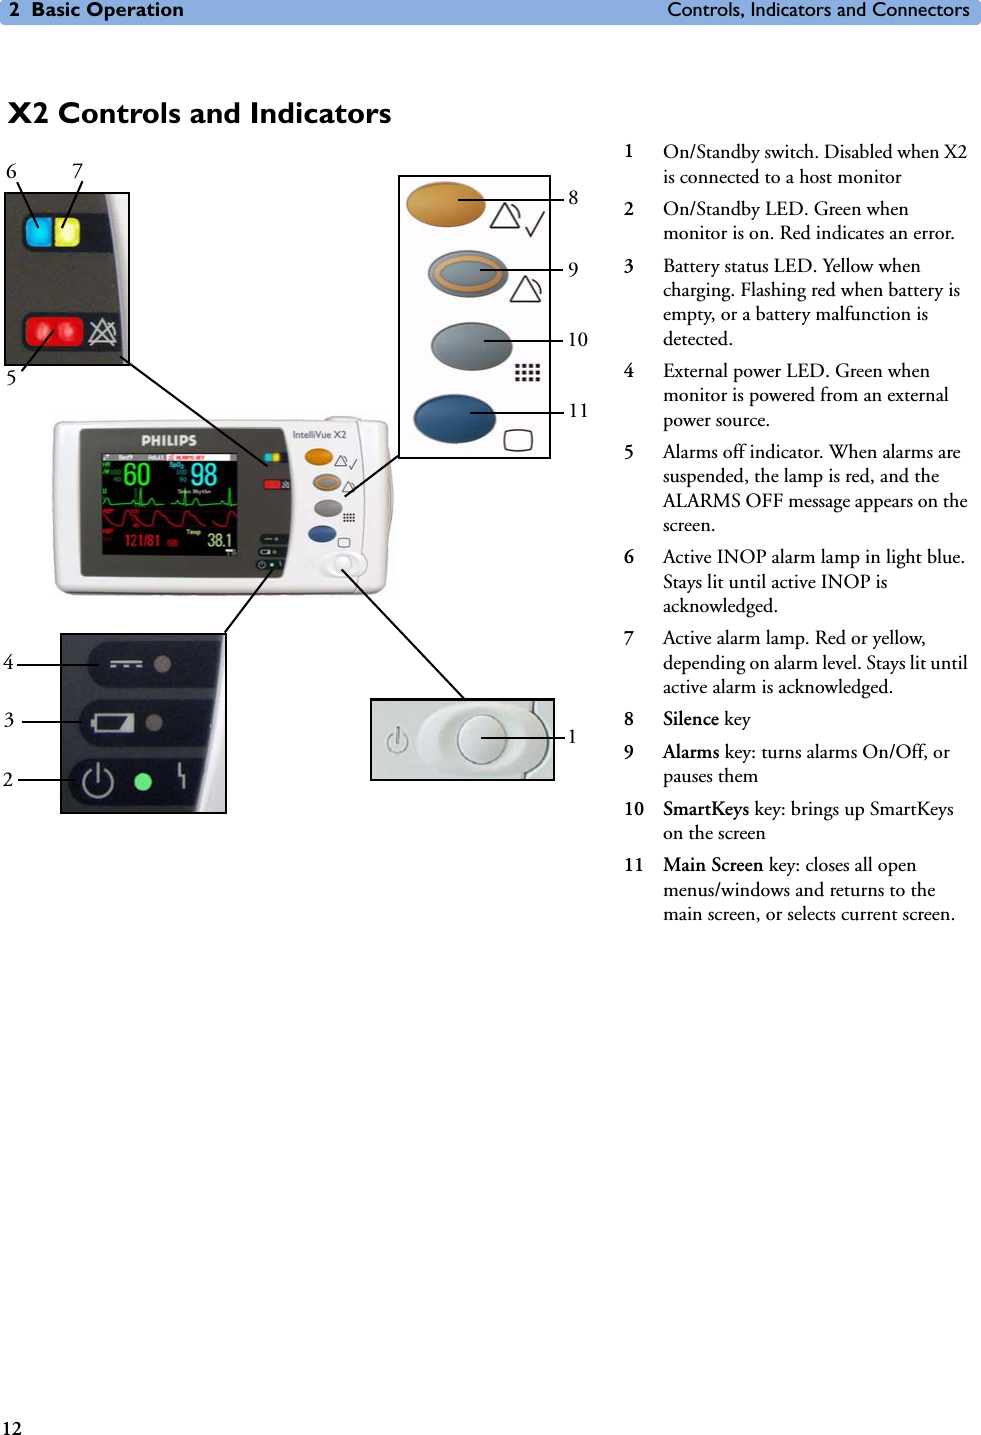 2 Basic Operation Controls, Indicators and Connectors12X2 Controls and Indicators1On/Standby switch. Disabled when X2 is connected to a host monitor2On/Standby LED. Green when monitor is on. Red indicates an error.3Battery status LED. Yellow when charging. Flashing red when battery is empty, or a battery malfunction is detected.4External power LED. Green when monitor is powered from an external power source.5Alarms off indicator. When alarms are suspended, the lamp is red, and the ALARMS OFF message appears on the screen.6Active INOP alarm lamp in light blue. Stays lit until active INOP is acknowledged.7Active alarm lamp. Red or yellow, depending on alarm level. Stays lit until active alarm is acknowledged.8Silence key9Alarms key: turns alarms On/Off, or pauses them10 SmartKeys key: brings up SmartKeys on the screen11 Main Screen key: closes all open menus/windows and returns to the main screen, or selects current screen.2346751111098